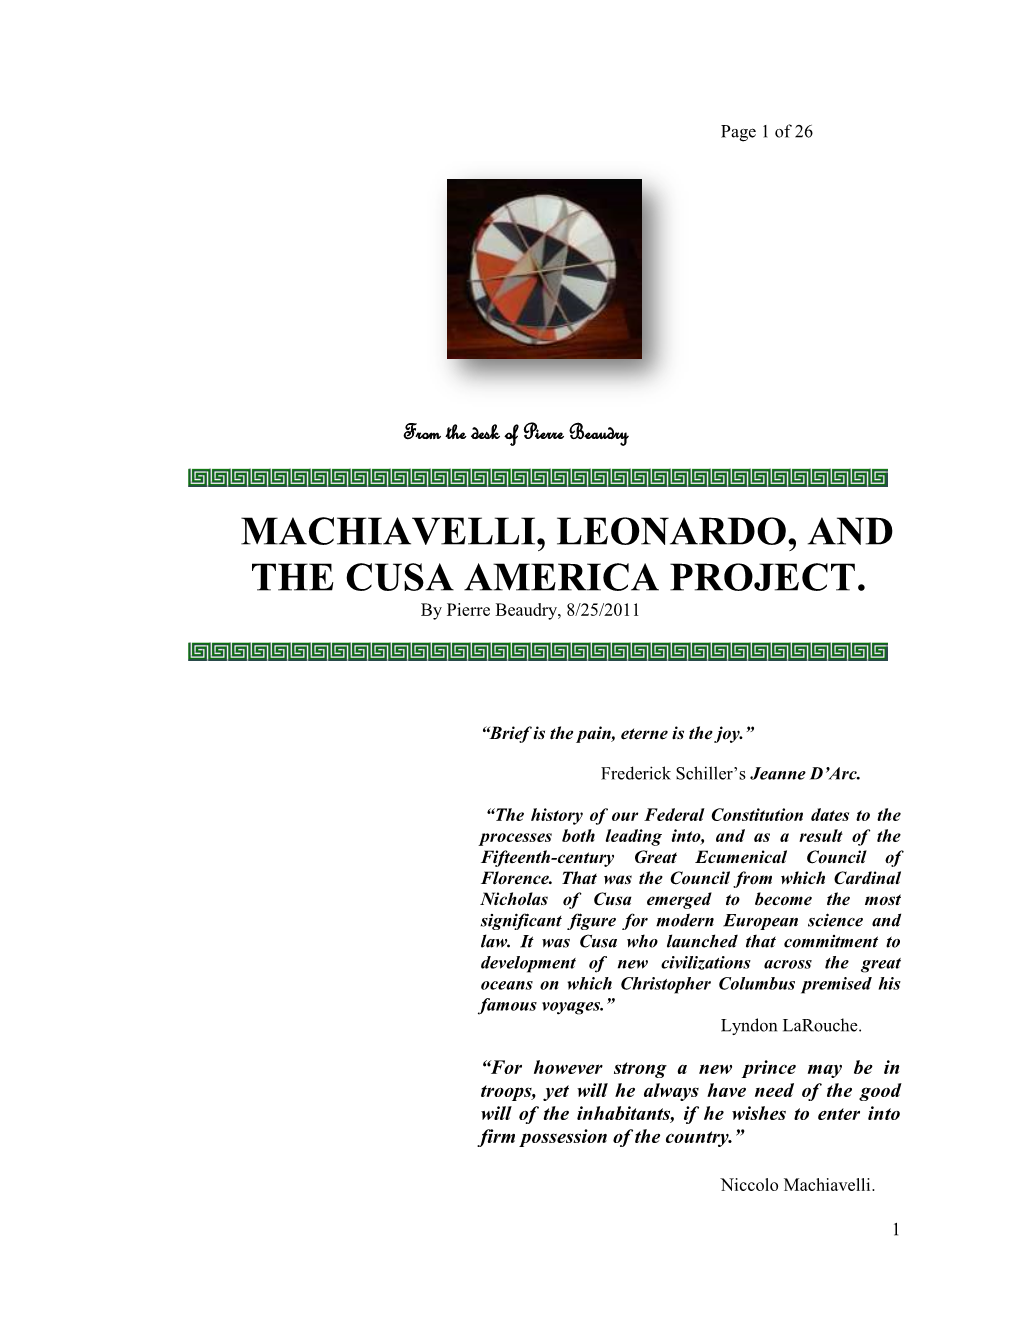 MACHIAVELLI, LEONARDO, and the CUSA AMERICA PROJECT. by Pierre Beaudry, 8/25/2011